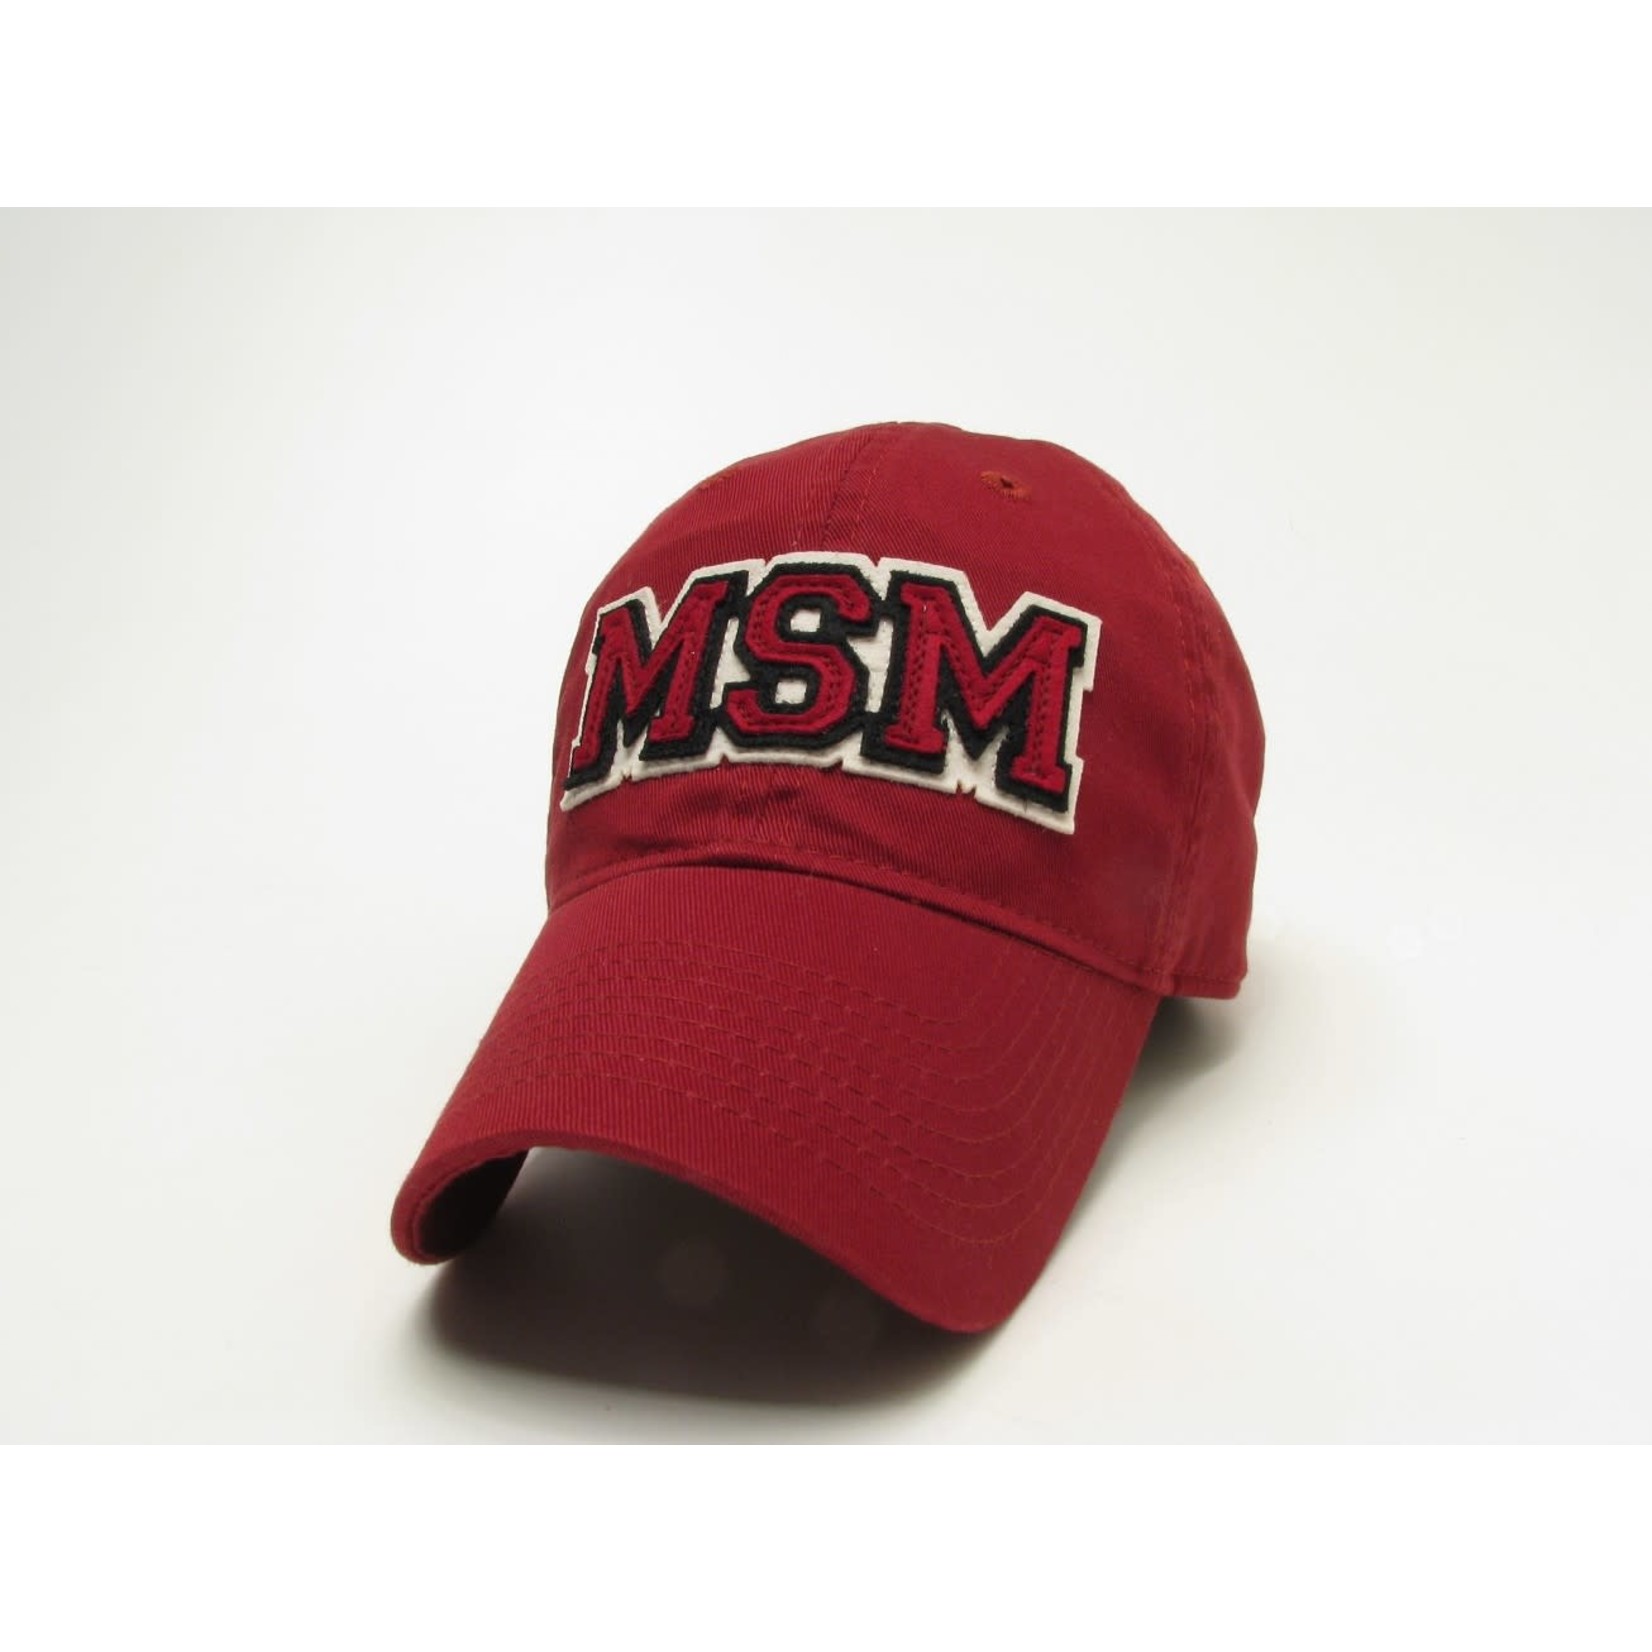 Cap: MSM embroidered